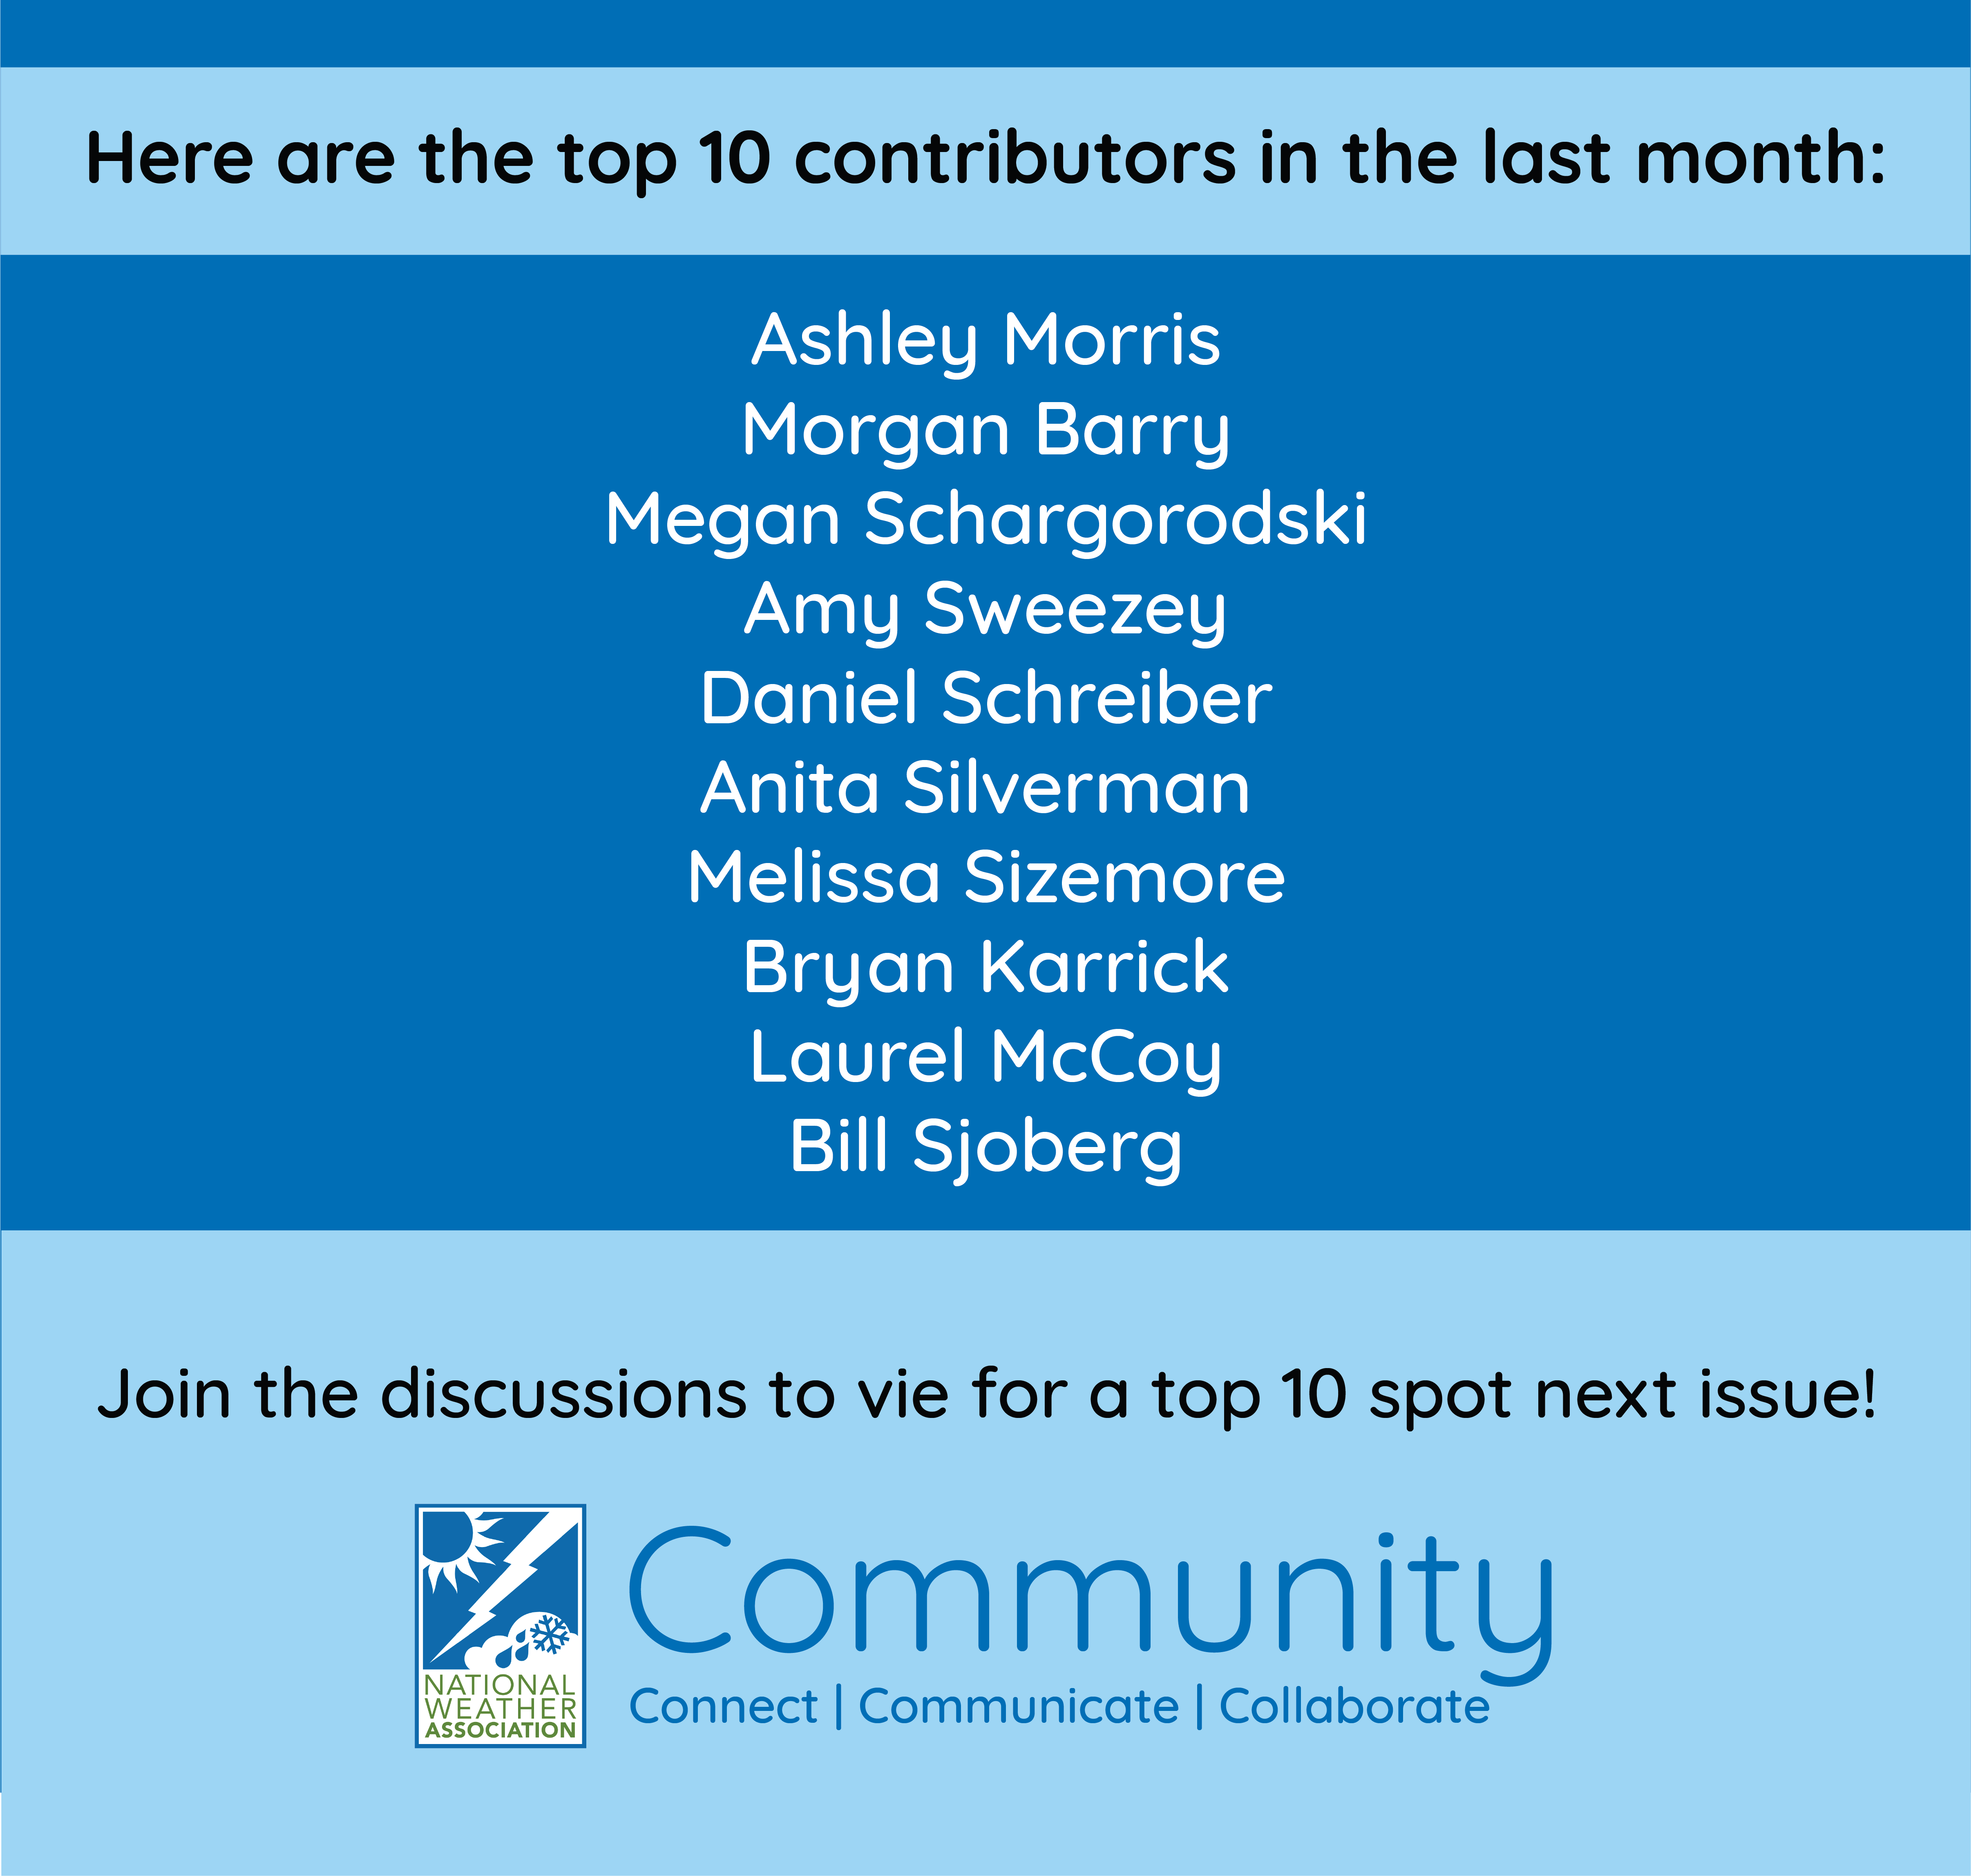 Top 10 contributors in the last month: Ashley Morris, Morgan Barry, Megan Schargorodski, Amy Sweezey, Daniel Schreiber, Anita Silverman, Melissa Sizemore, Bryan Karrick, Laurel McCoy, Bill Sjoberg. Join discussions for a chance in the next issue's top 10. NATIONAL WEATHER ASSOCIATION Community: Connect, Communicate, Collaborate.